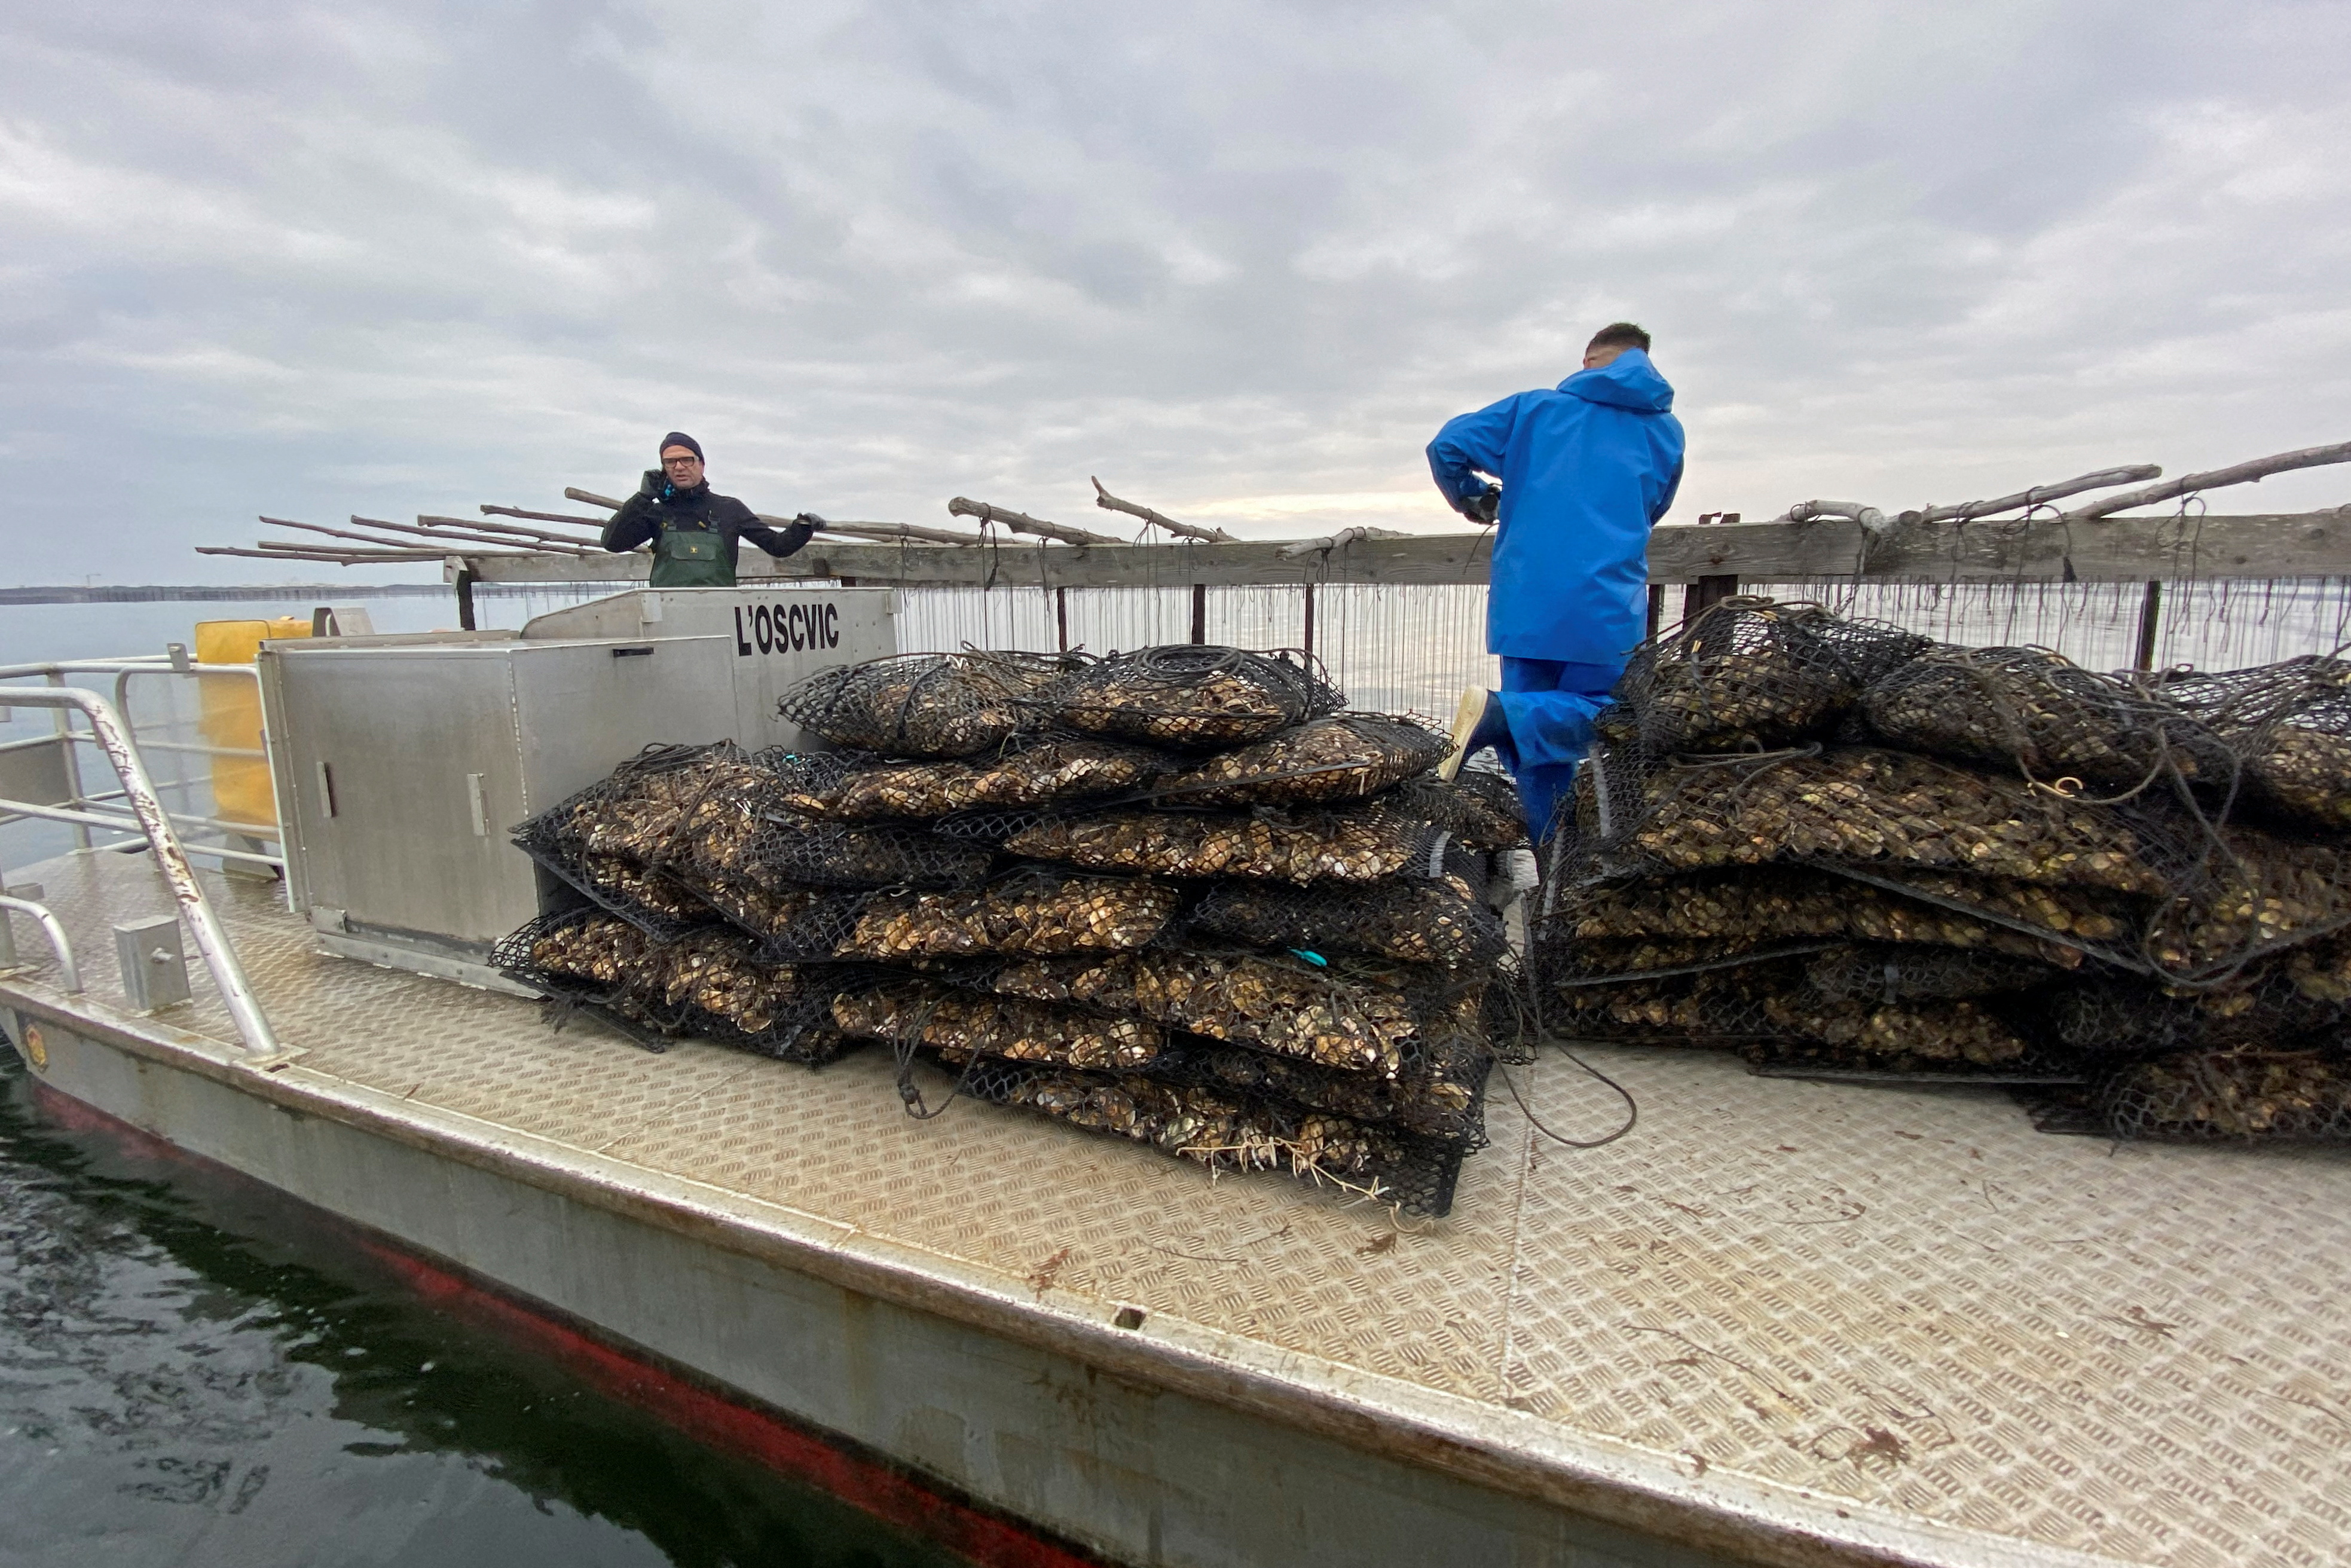 Oyster farmers are seen at work, near Leucate, southern France, December 23, 2021. Picture taken December 23, 2021. REUTERS/Alexandre Minguez  